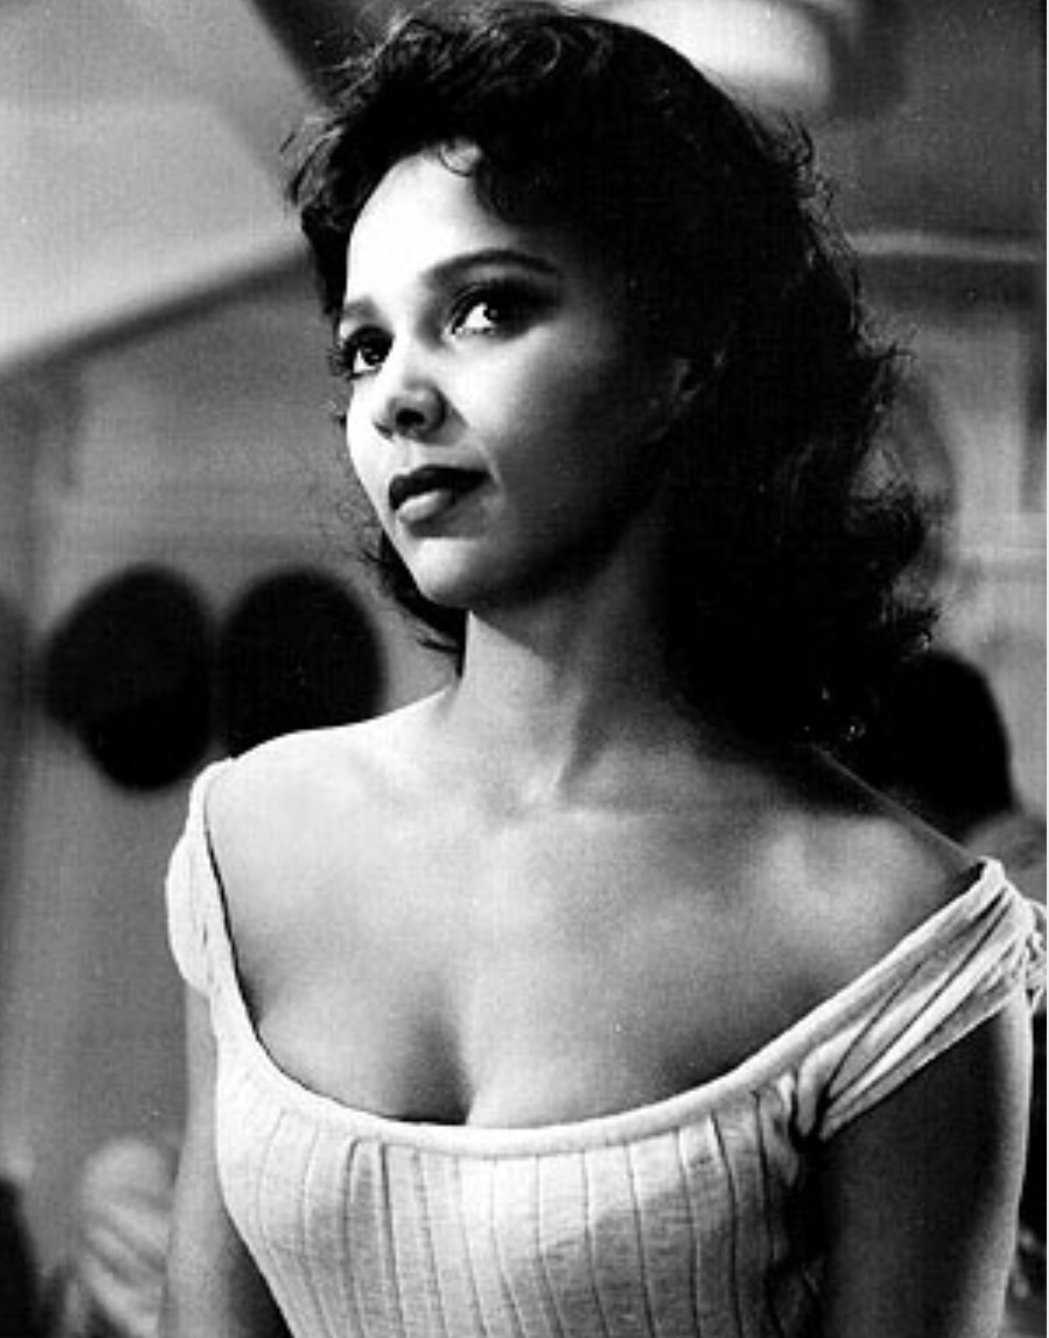 51 Hottest Dorothy Dandridge Bikini Pictures Are Just Too Sexy | Best Of Comic Books